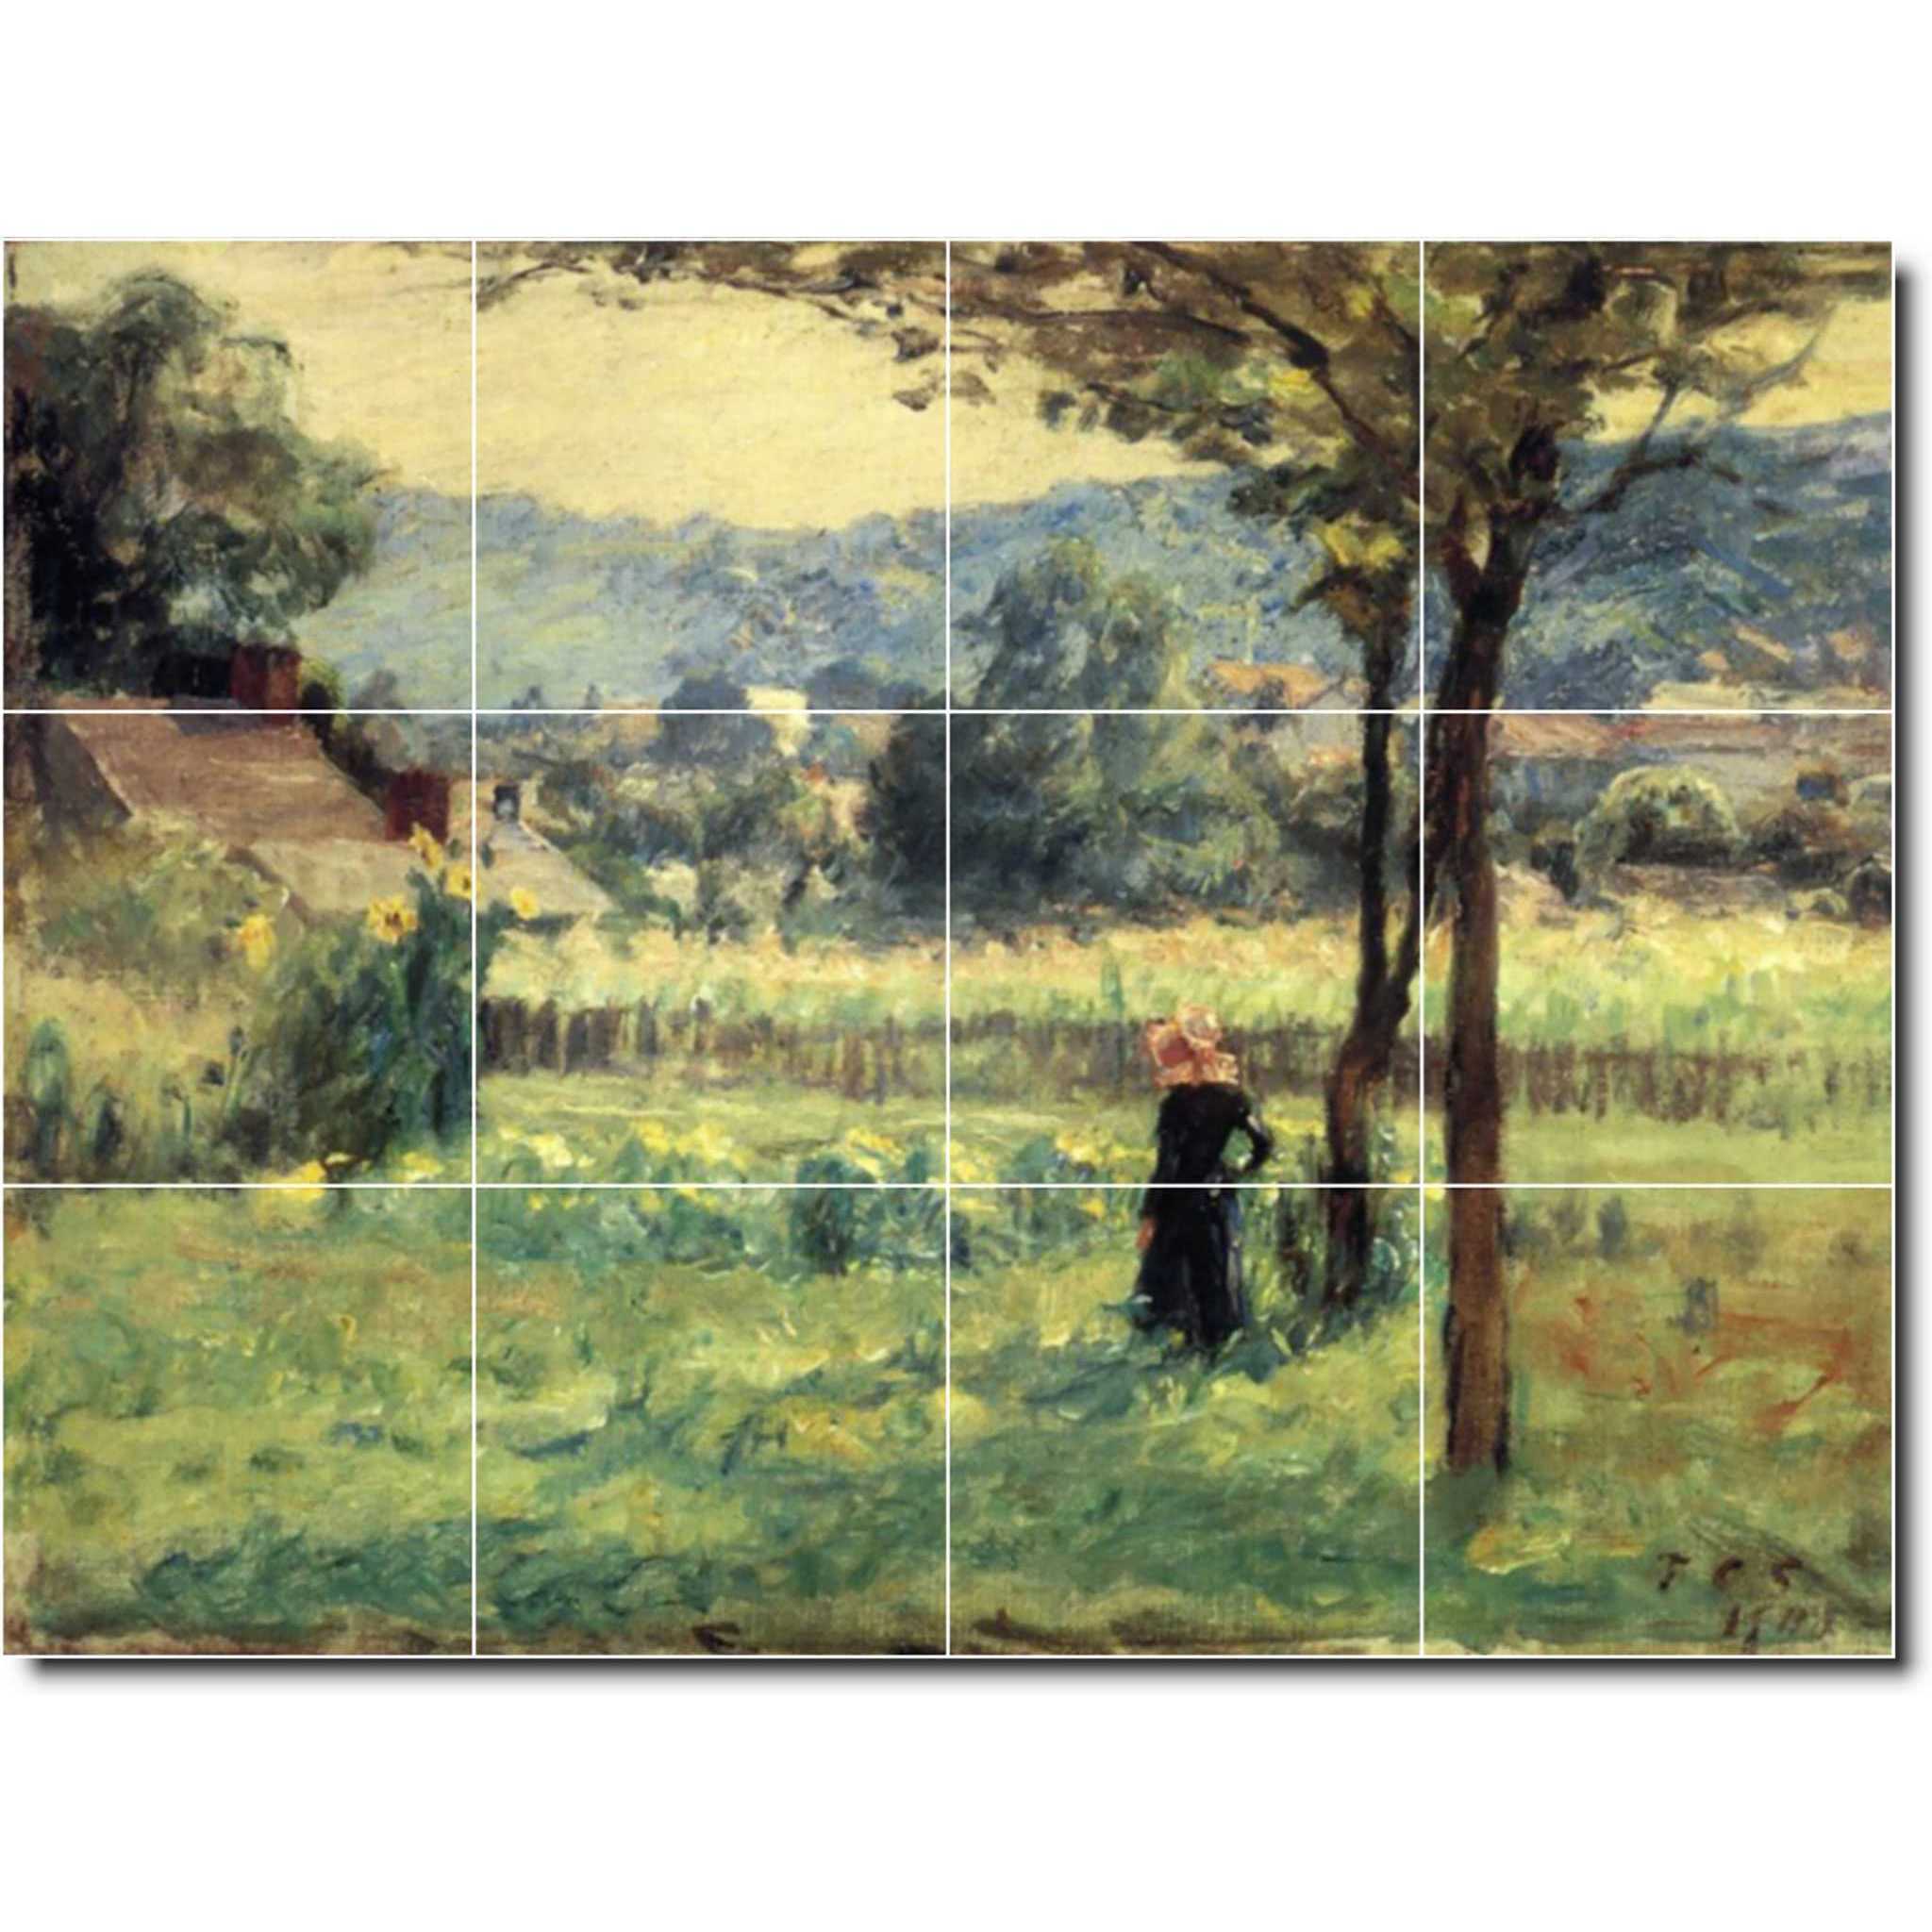 theodore steele country painting ceramic tile mural p08373